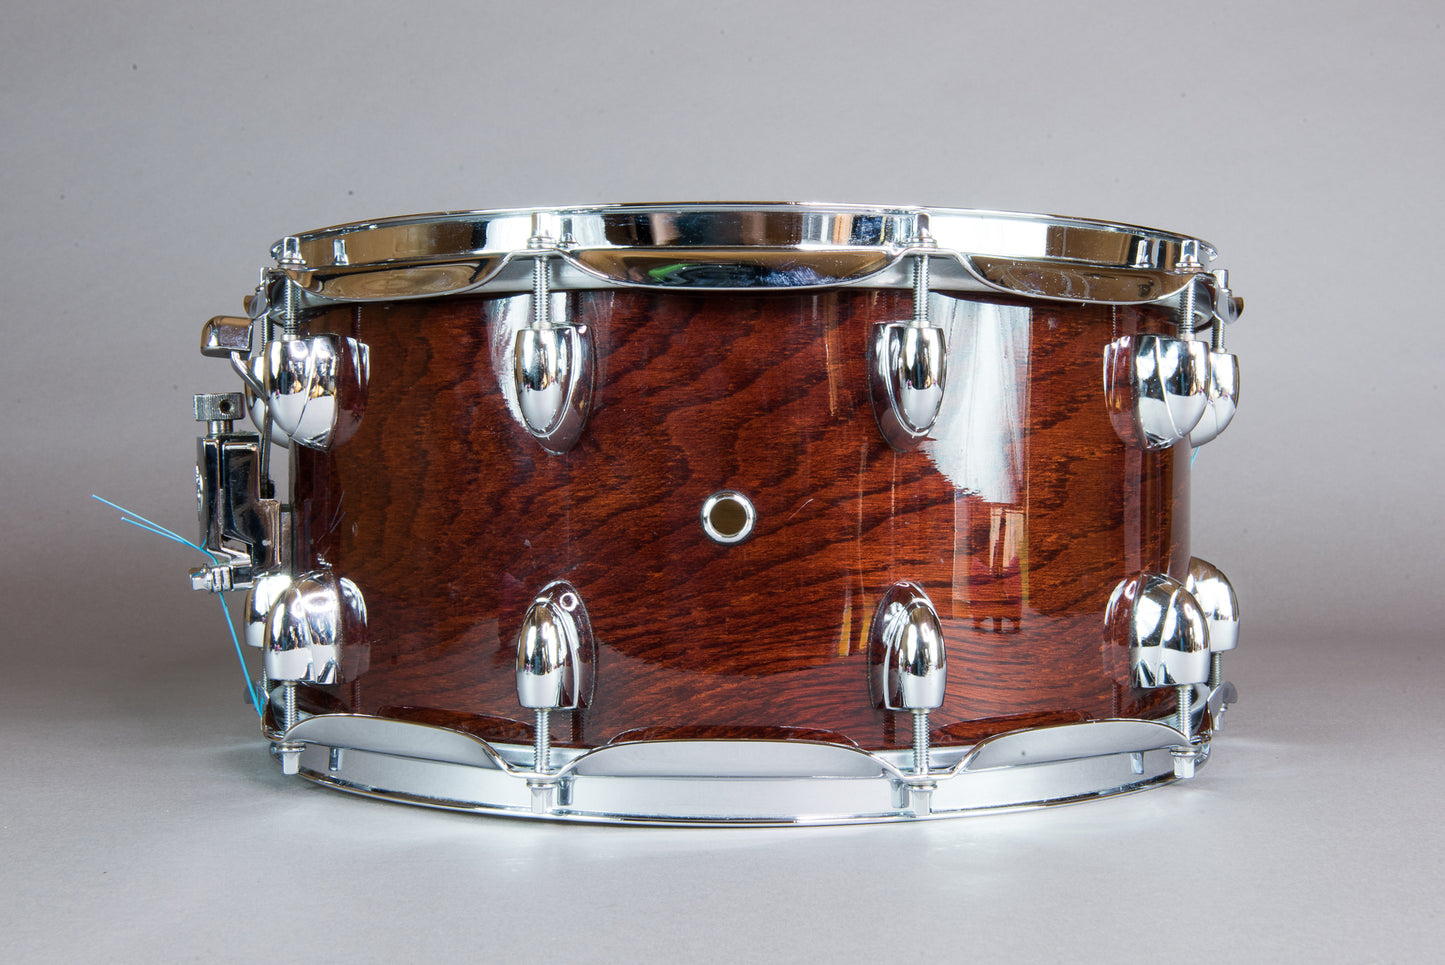 Yamaha 14" x 7" Gold Badge Oak Snare Drum in Bryce Canyon